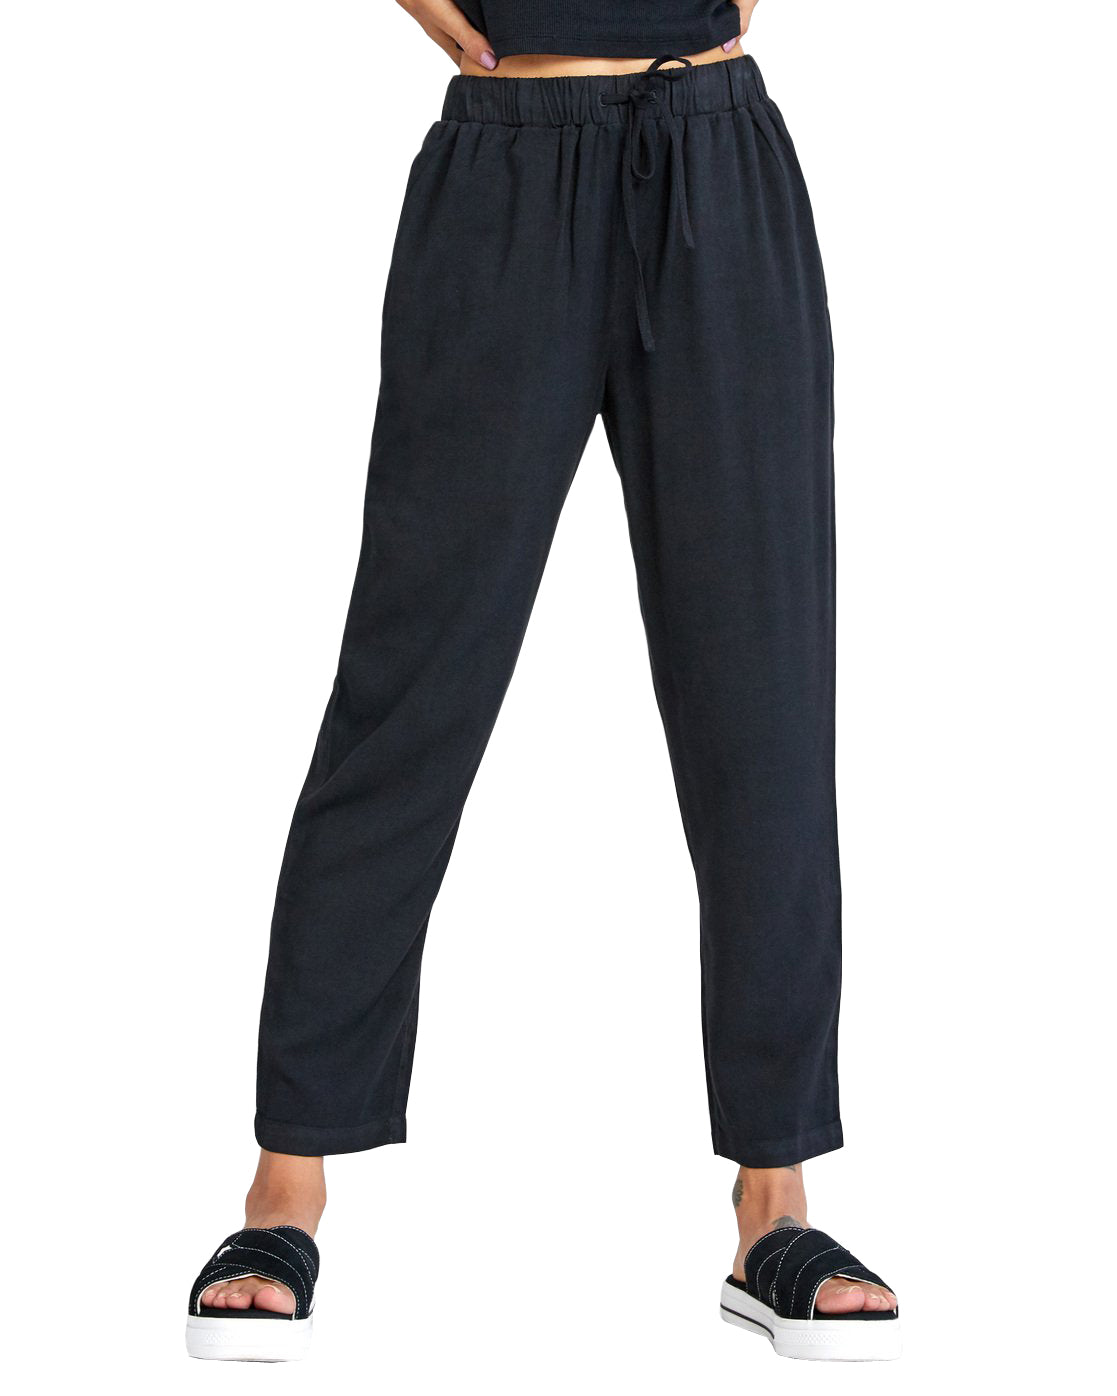 RVCA  Blank Stare Relaxed Fit Pants BLK S